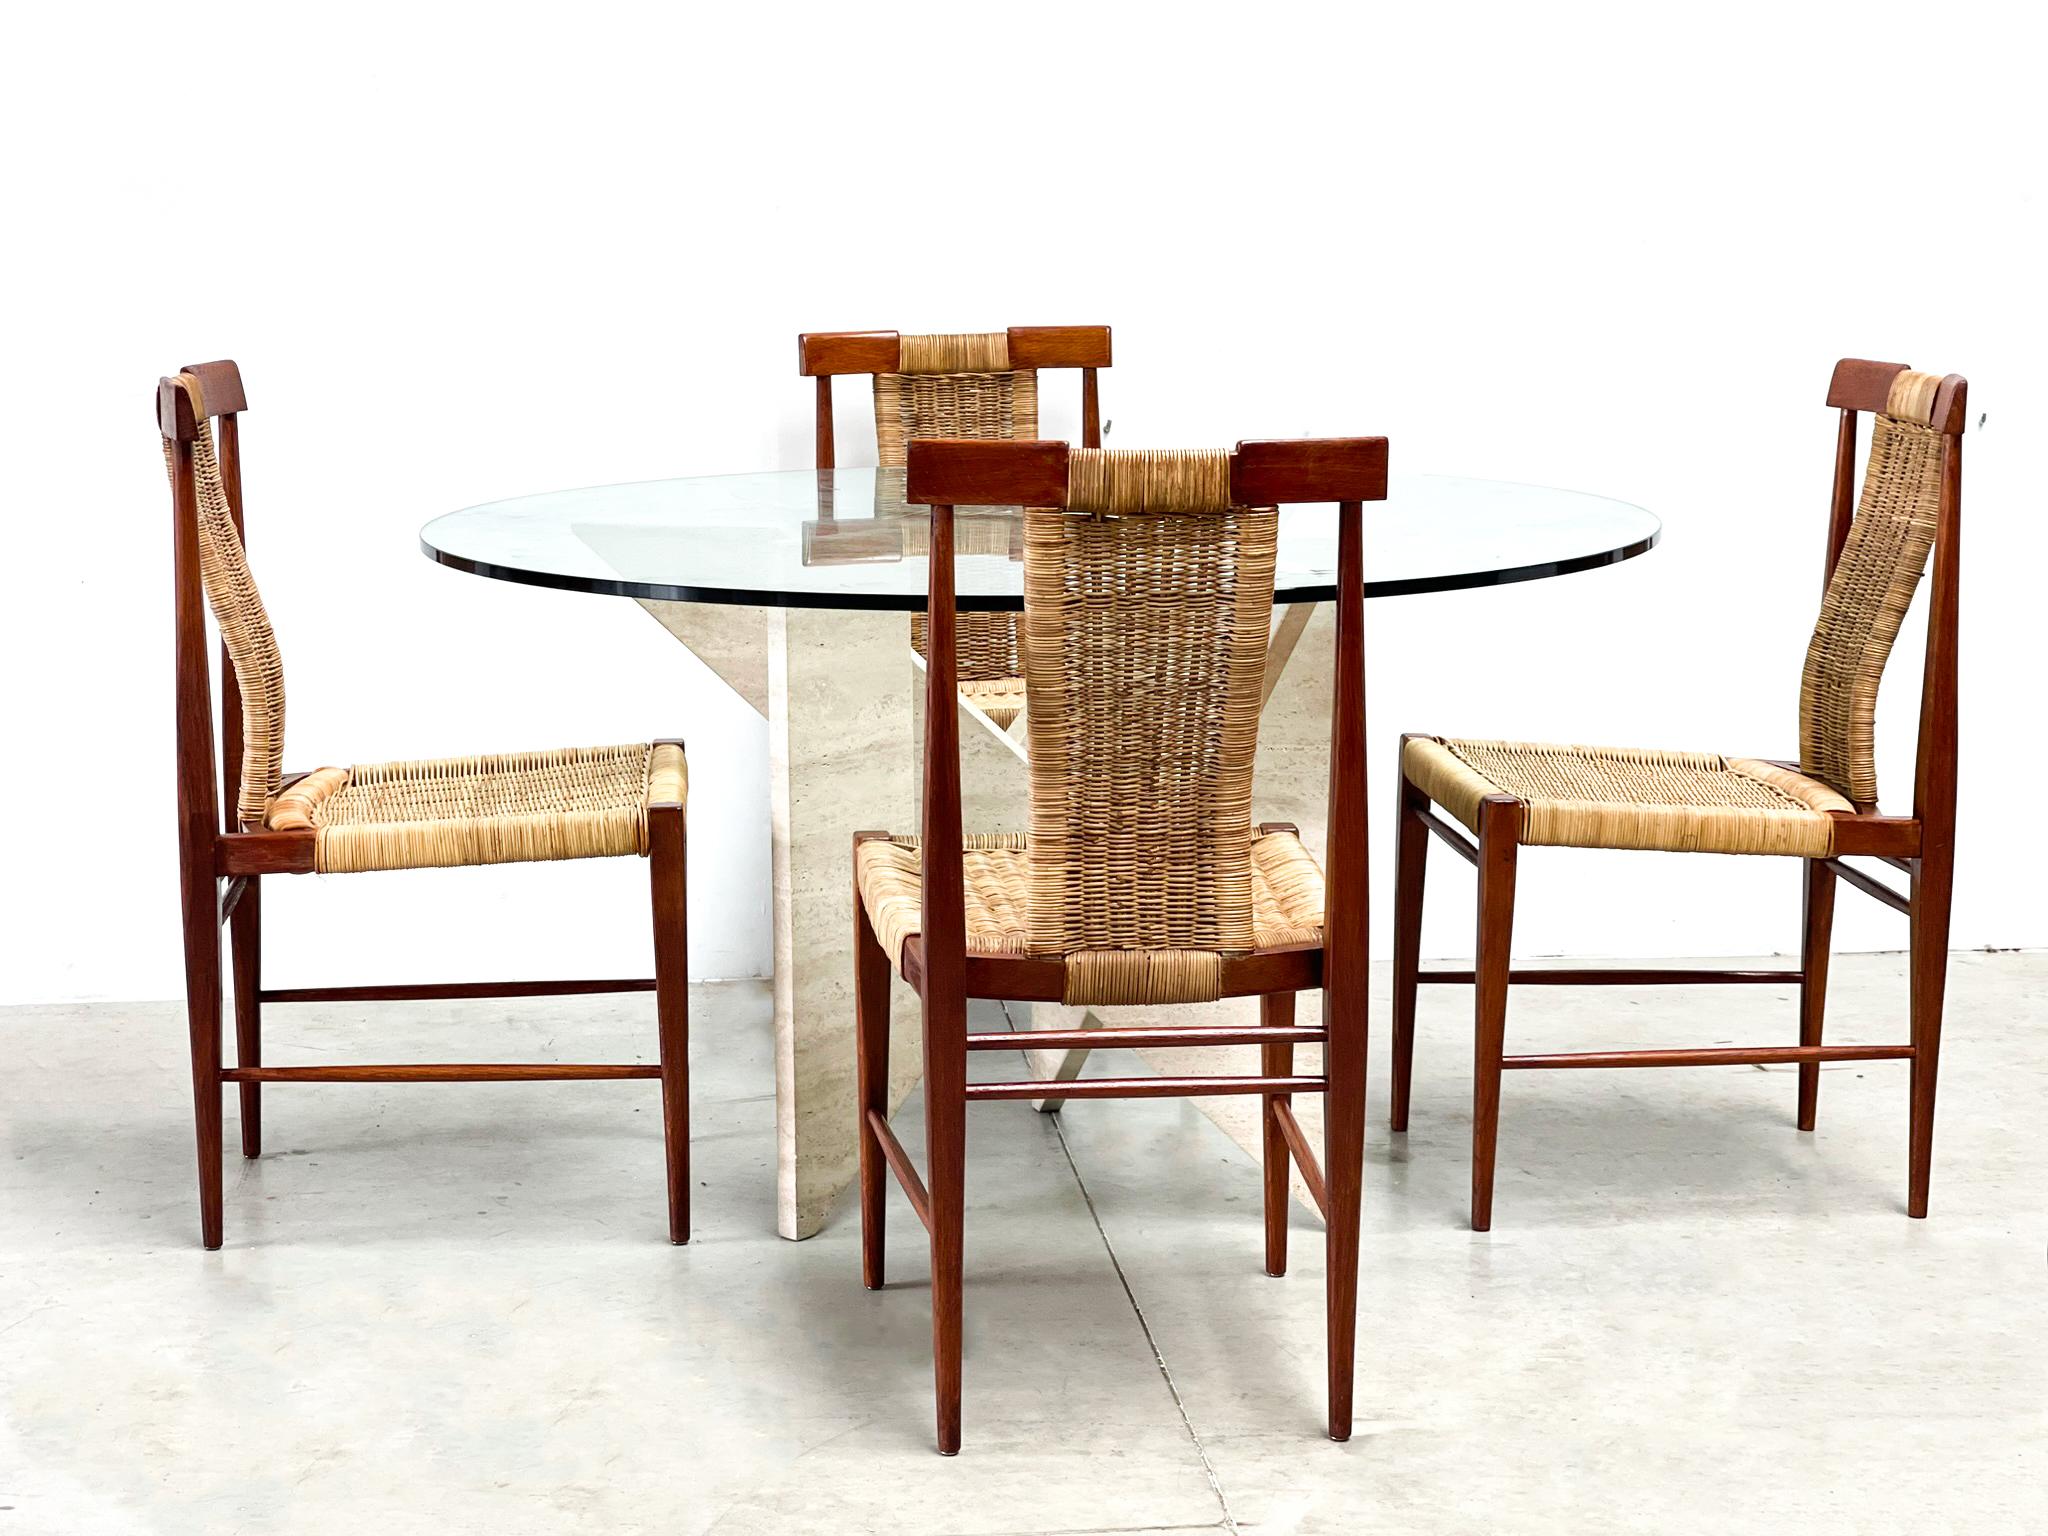 Mid-20th Century Vintage Teak and Wicker Dining Chairs, 1960s For Sale